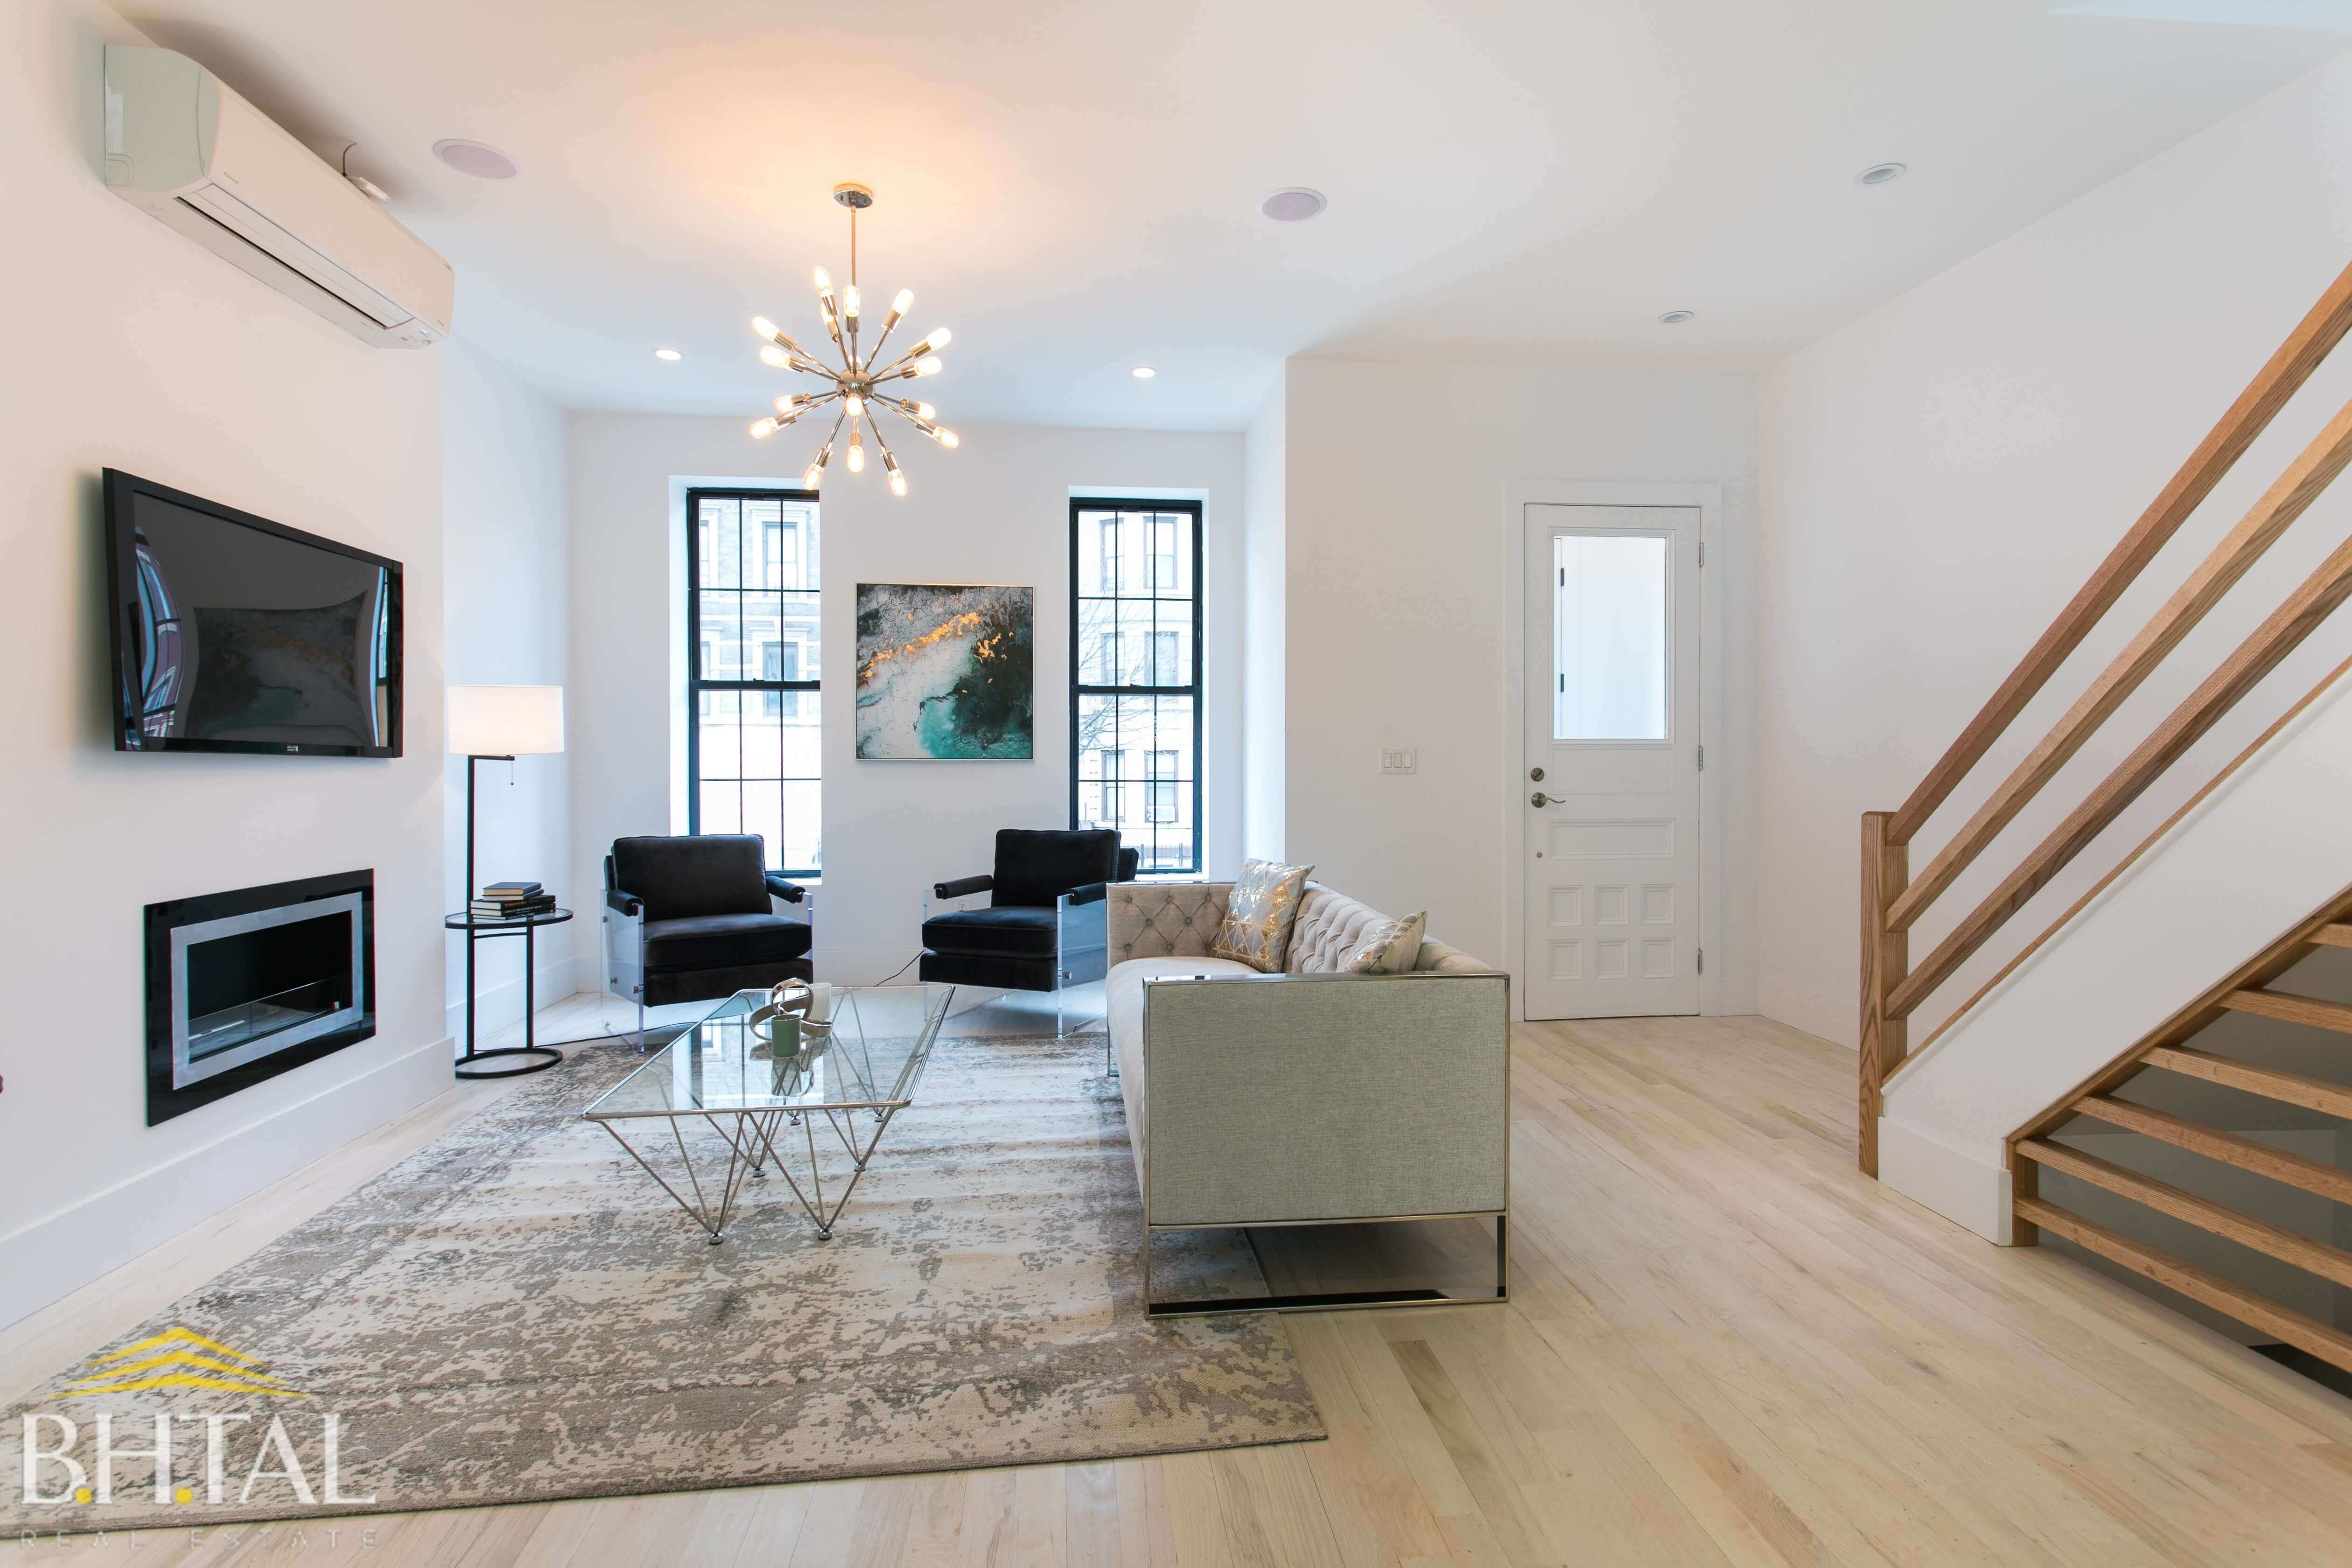 brooklyn-homes-for-sale-clinton-hill-bed-stuy-prospect-lefferts-gardens-crown-heights-3